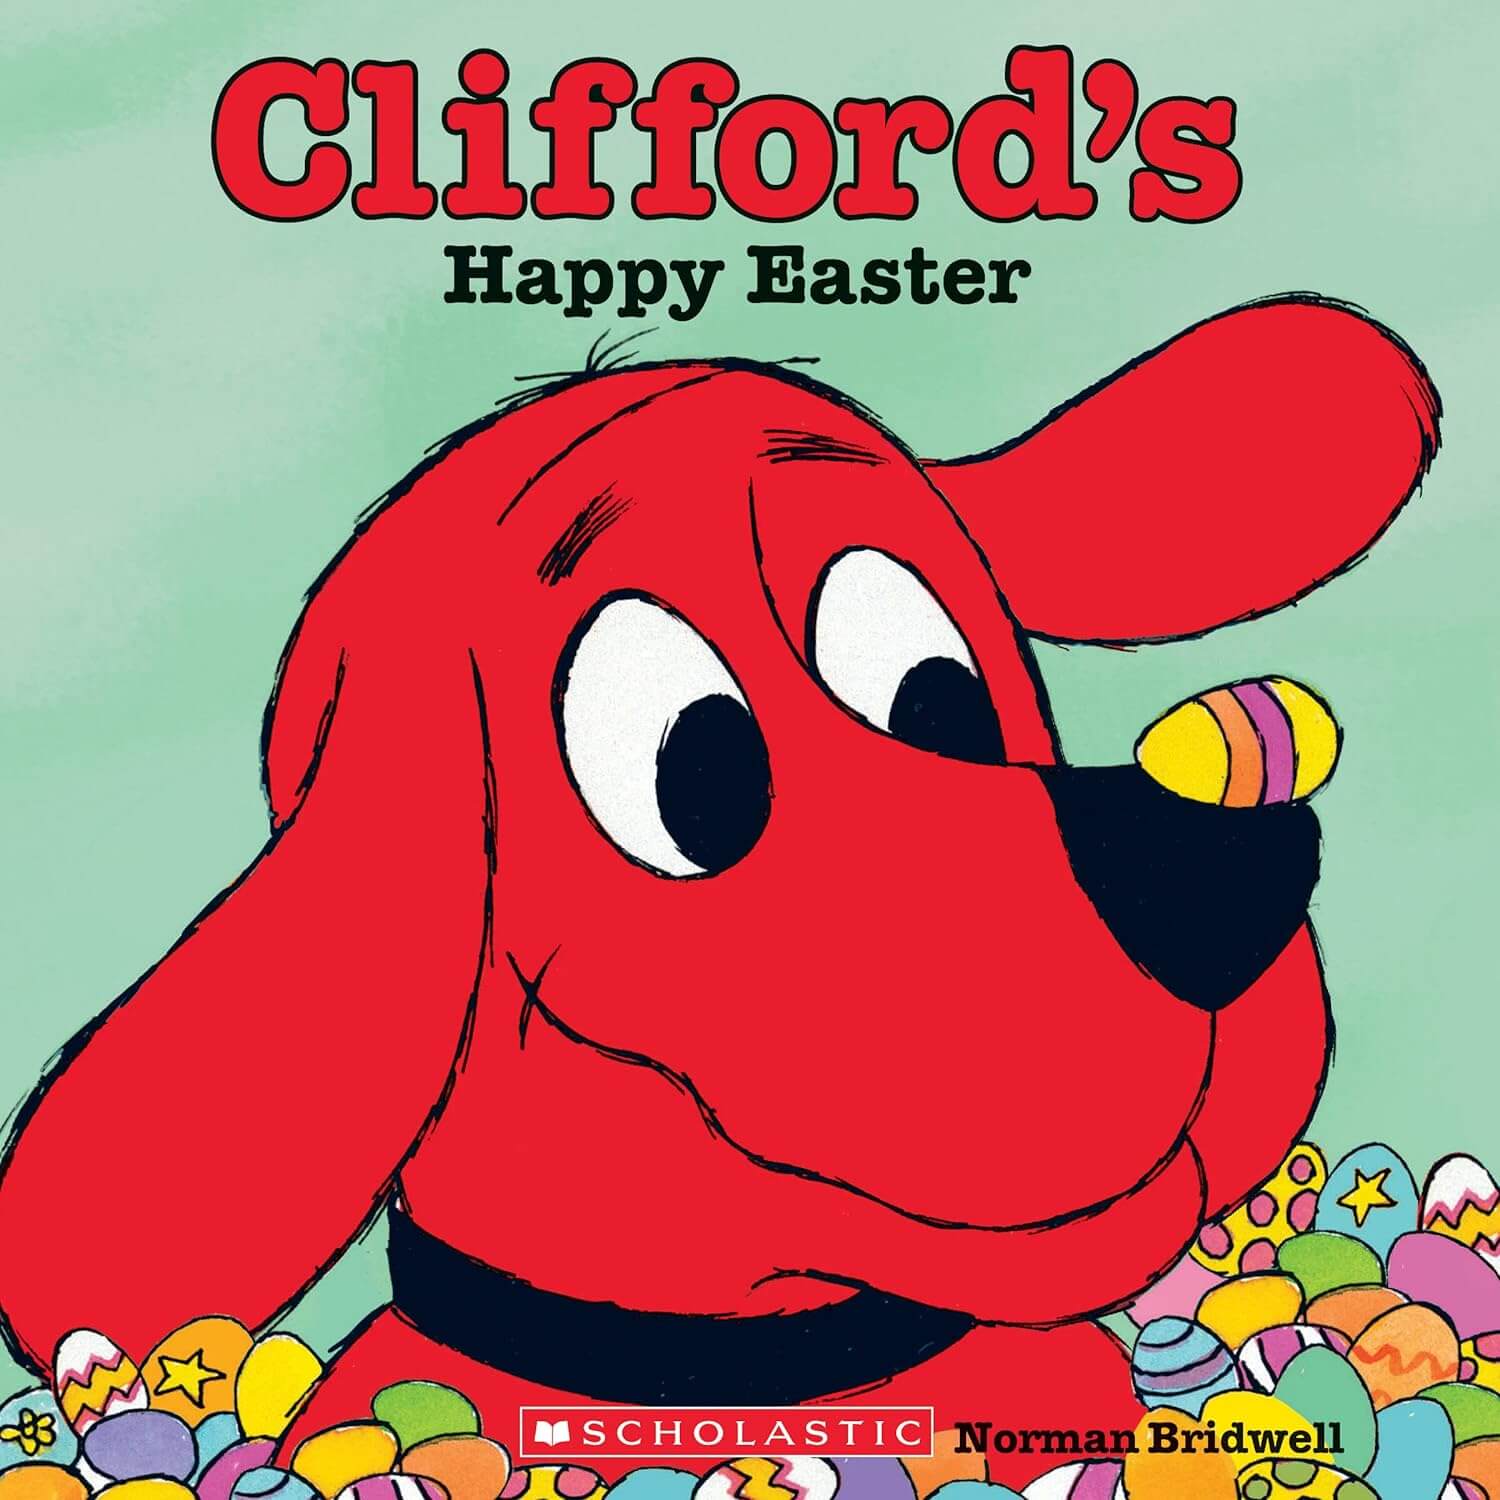 Clifford the big red dog with a painted easter egg on the tip of his nose